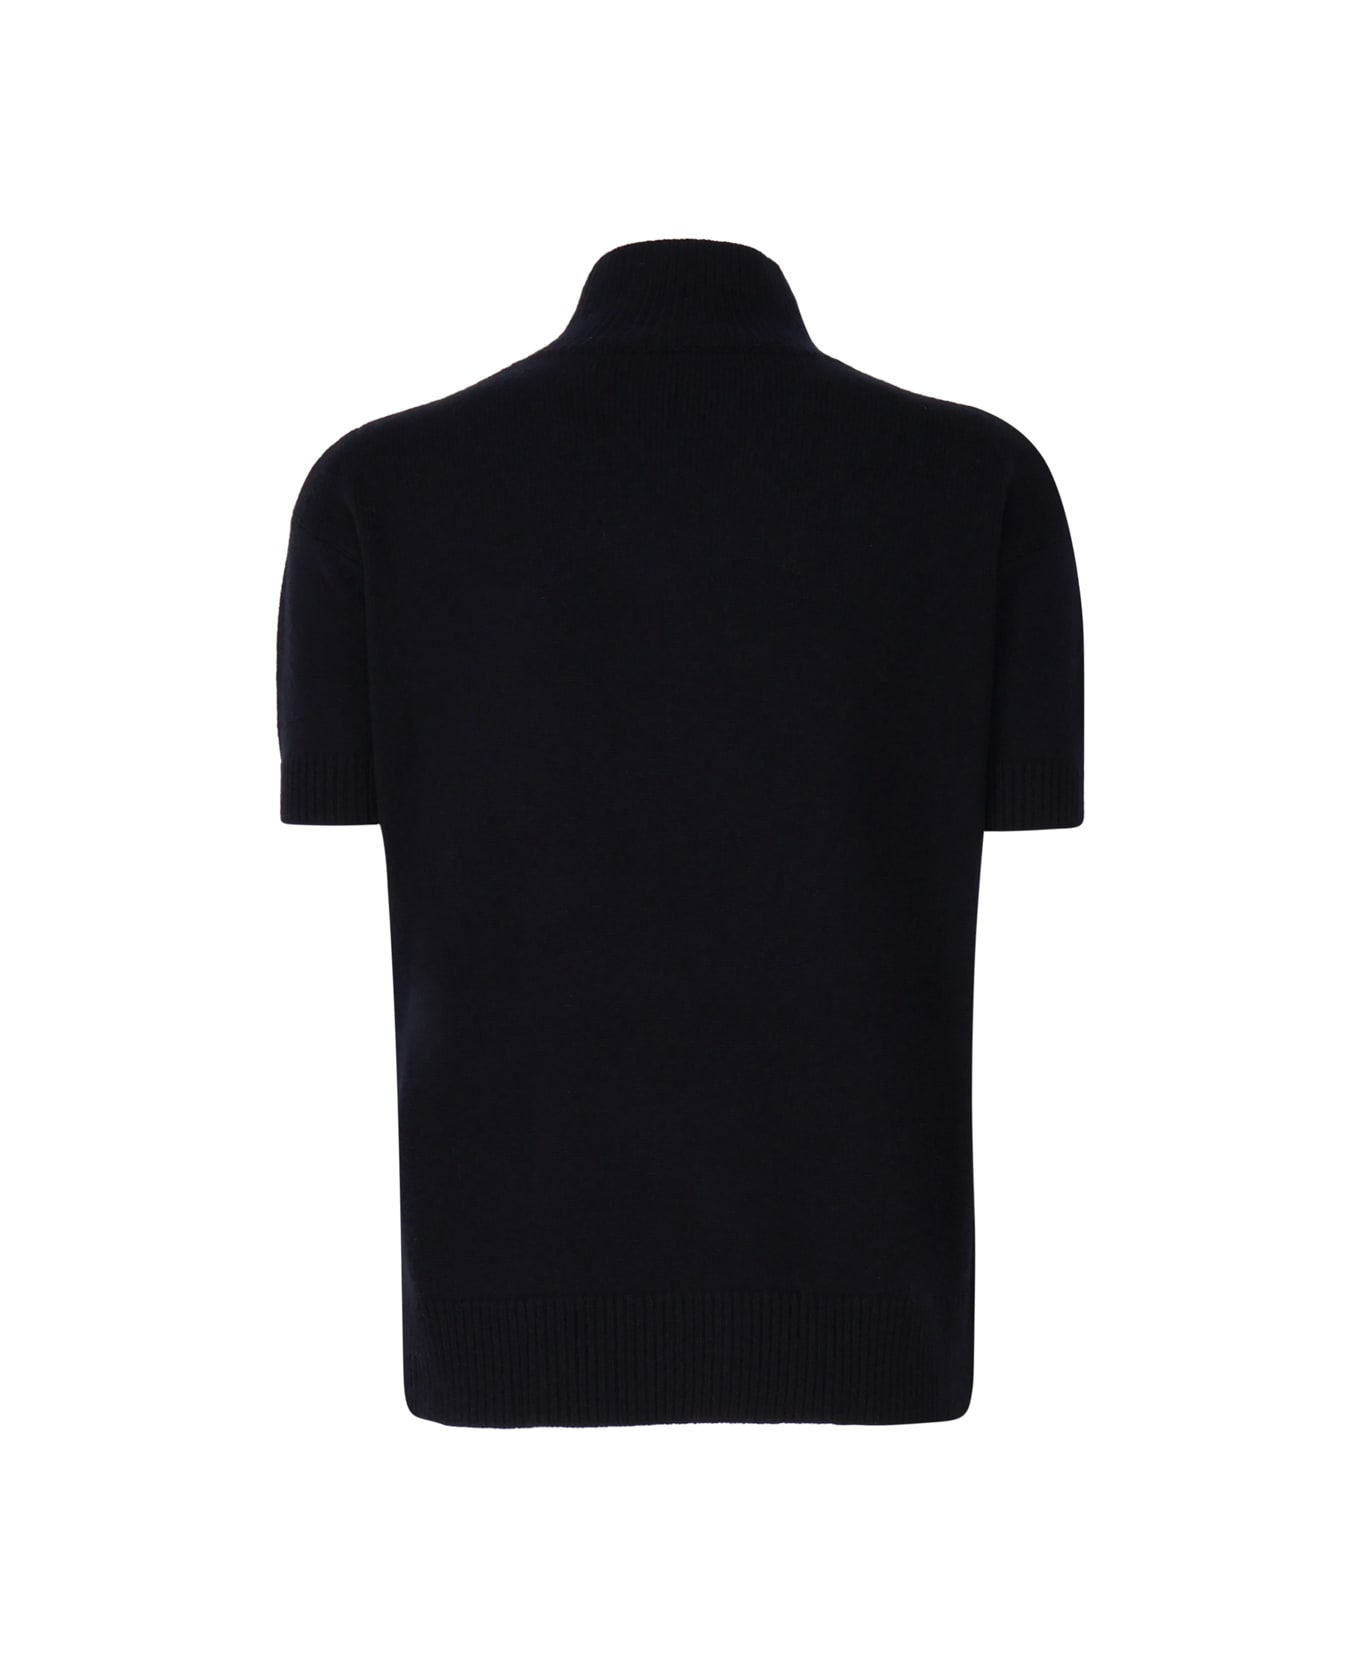 'S Max Mara Wool And Cashmere Turtleneck - Black